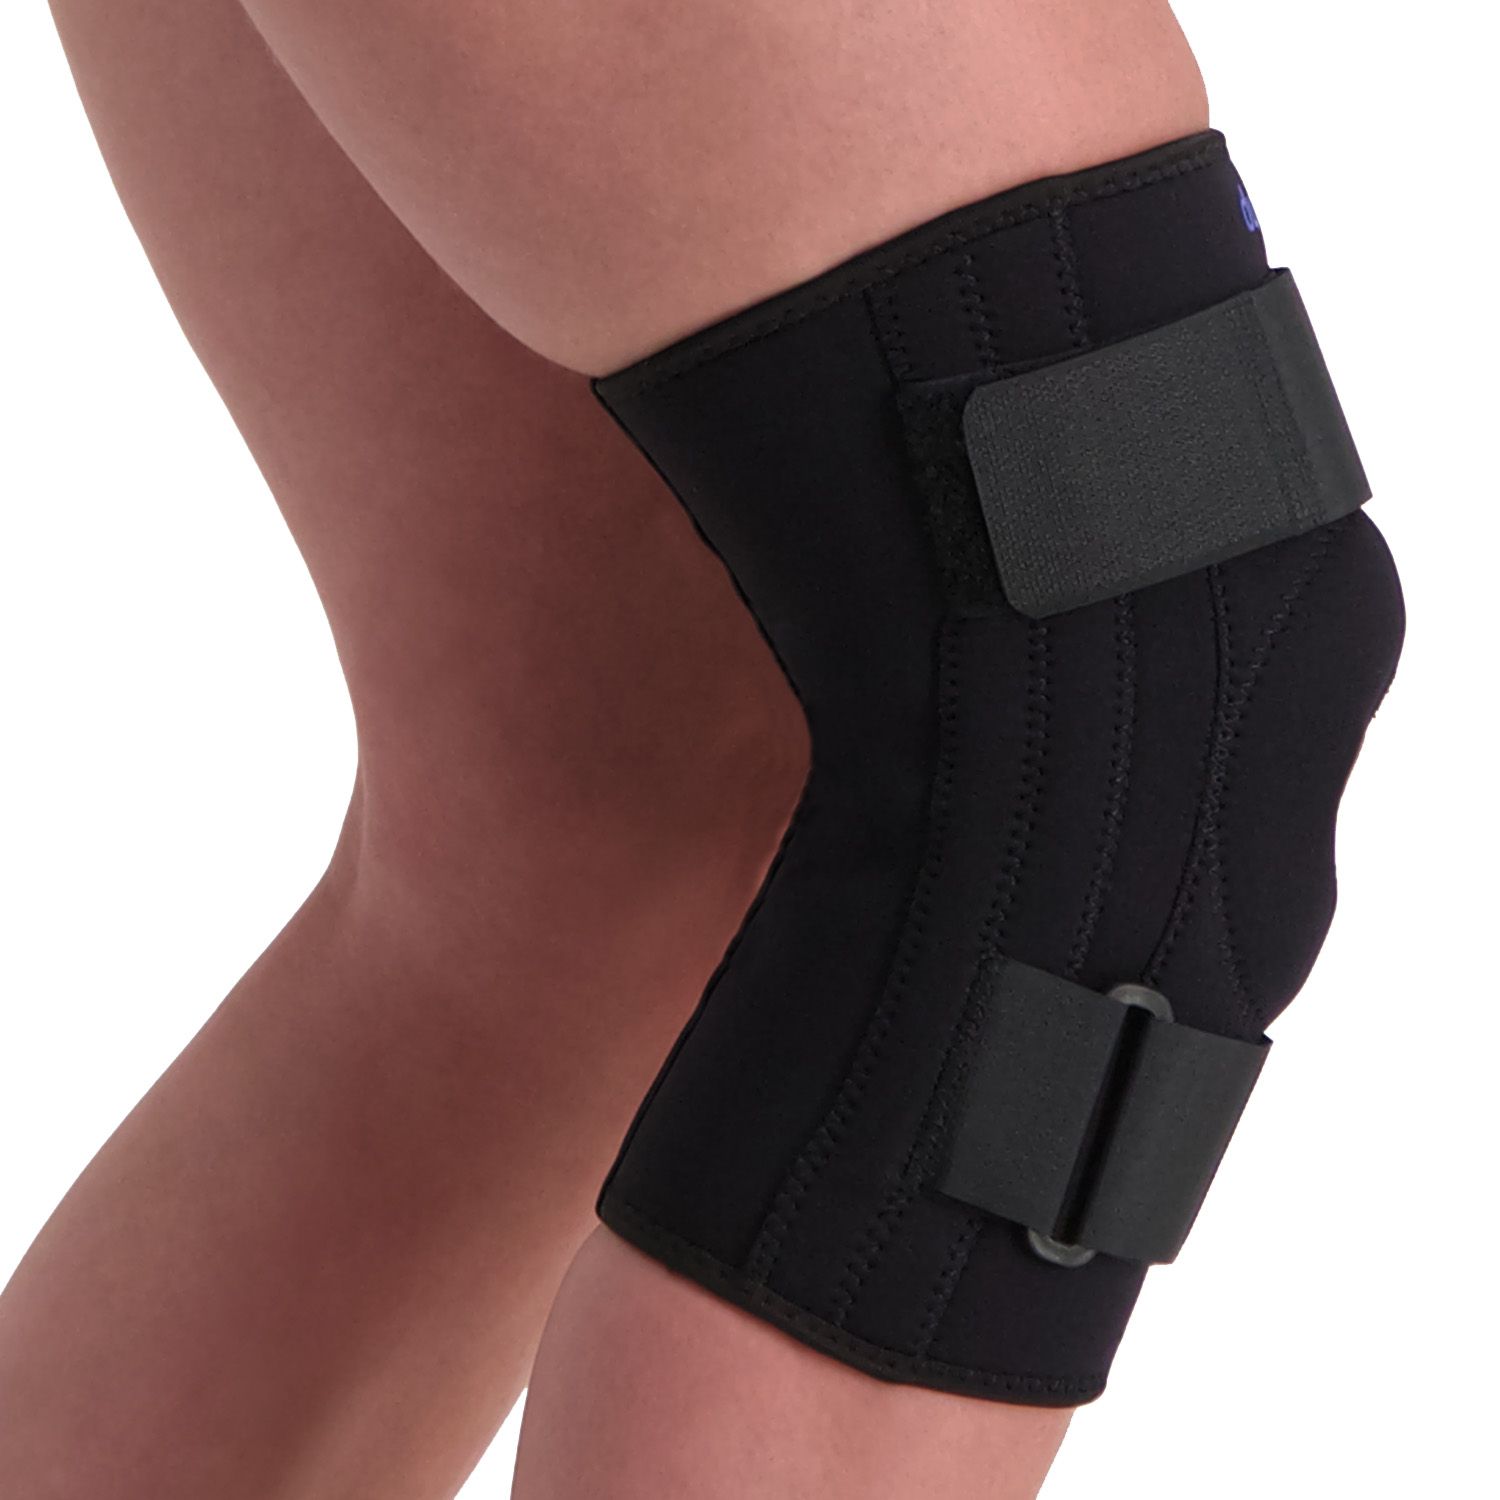 dunimed knee support with busks side view